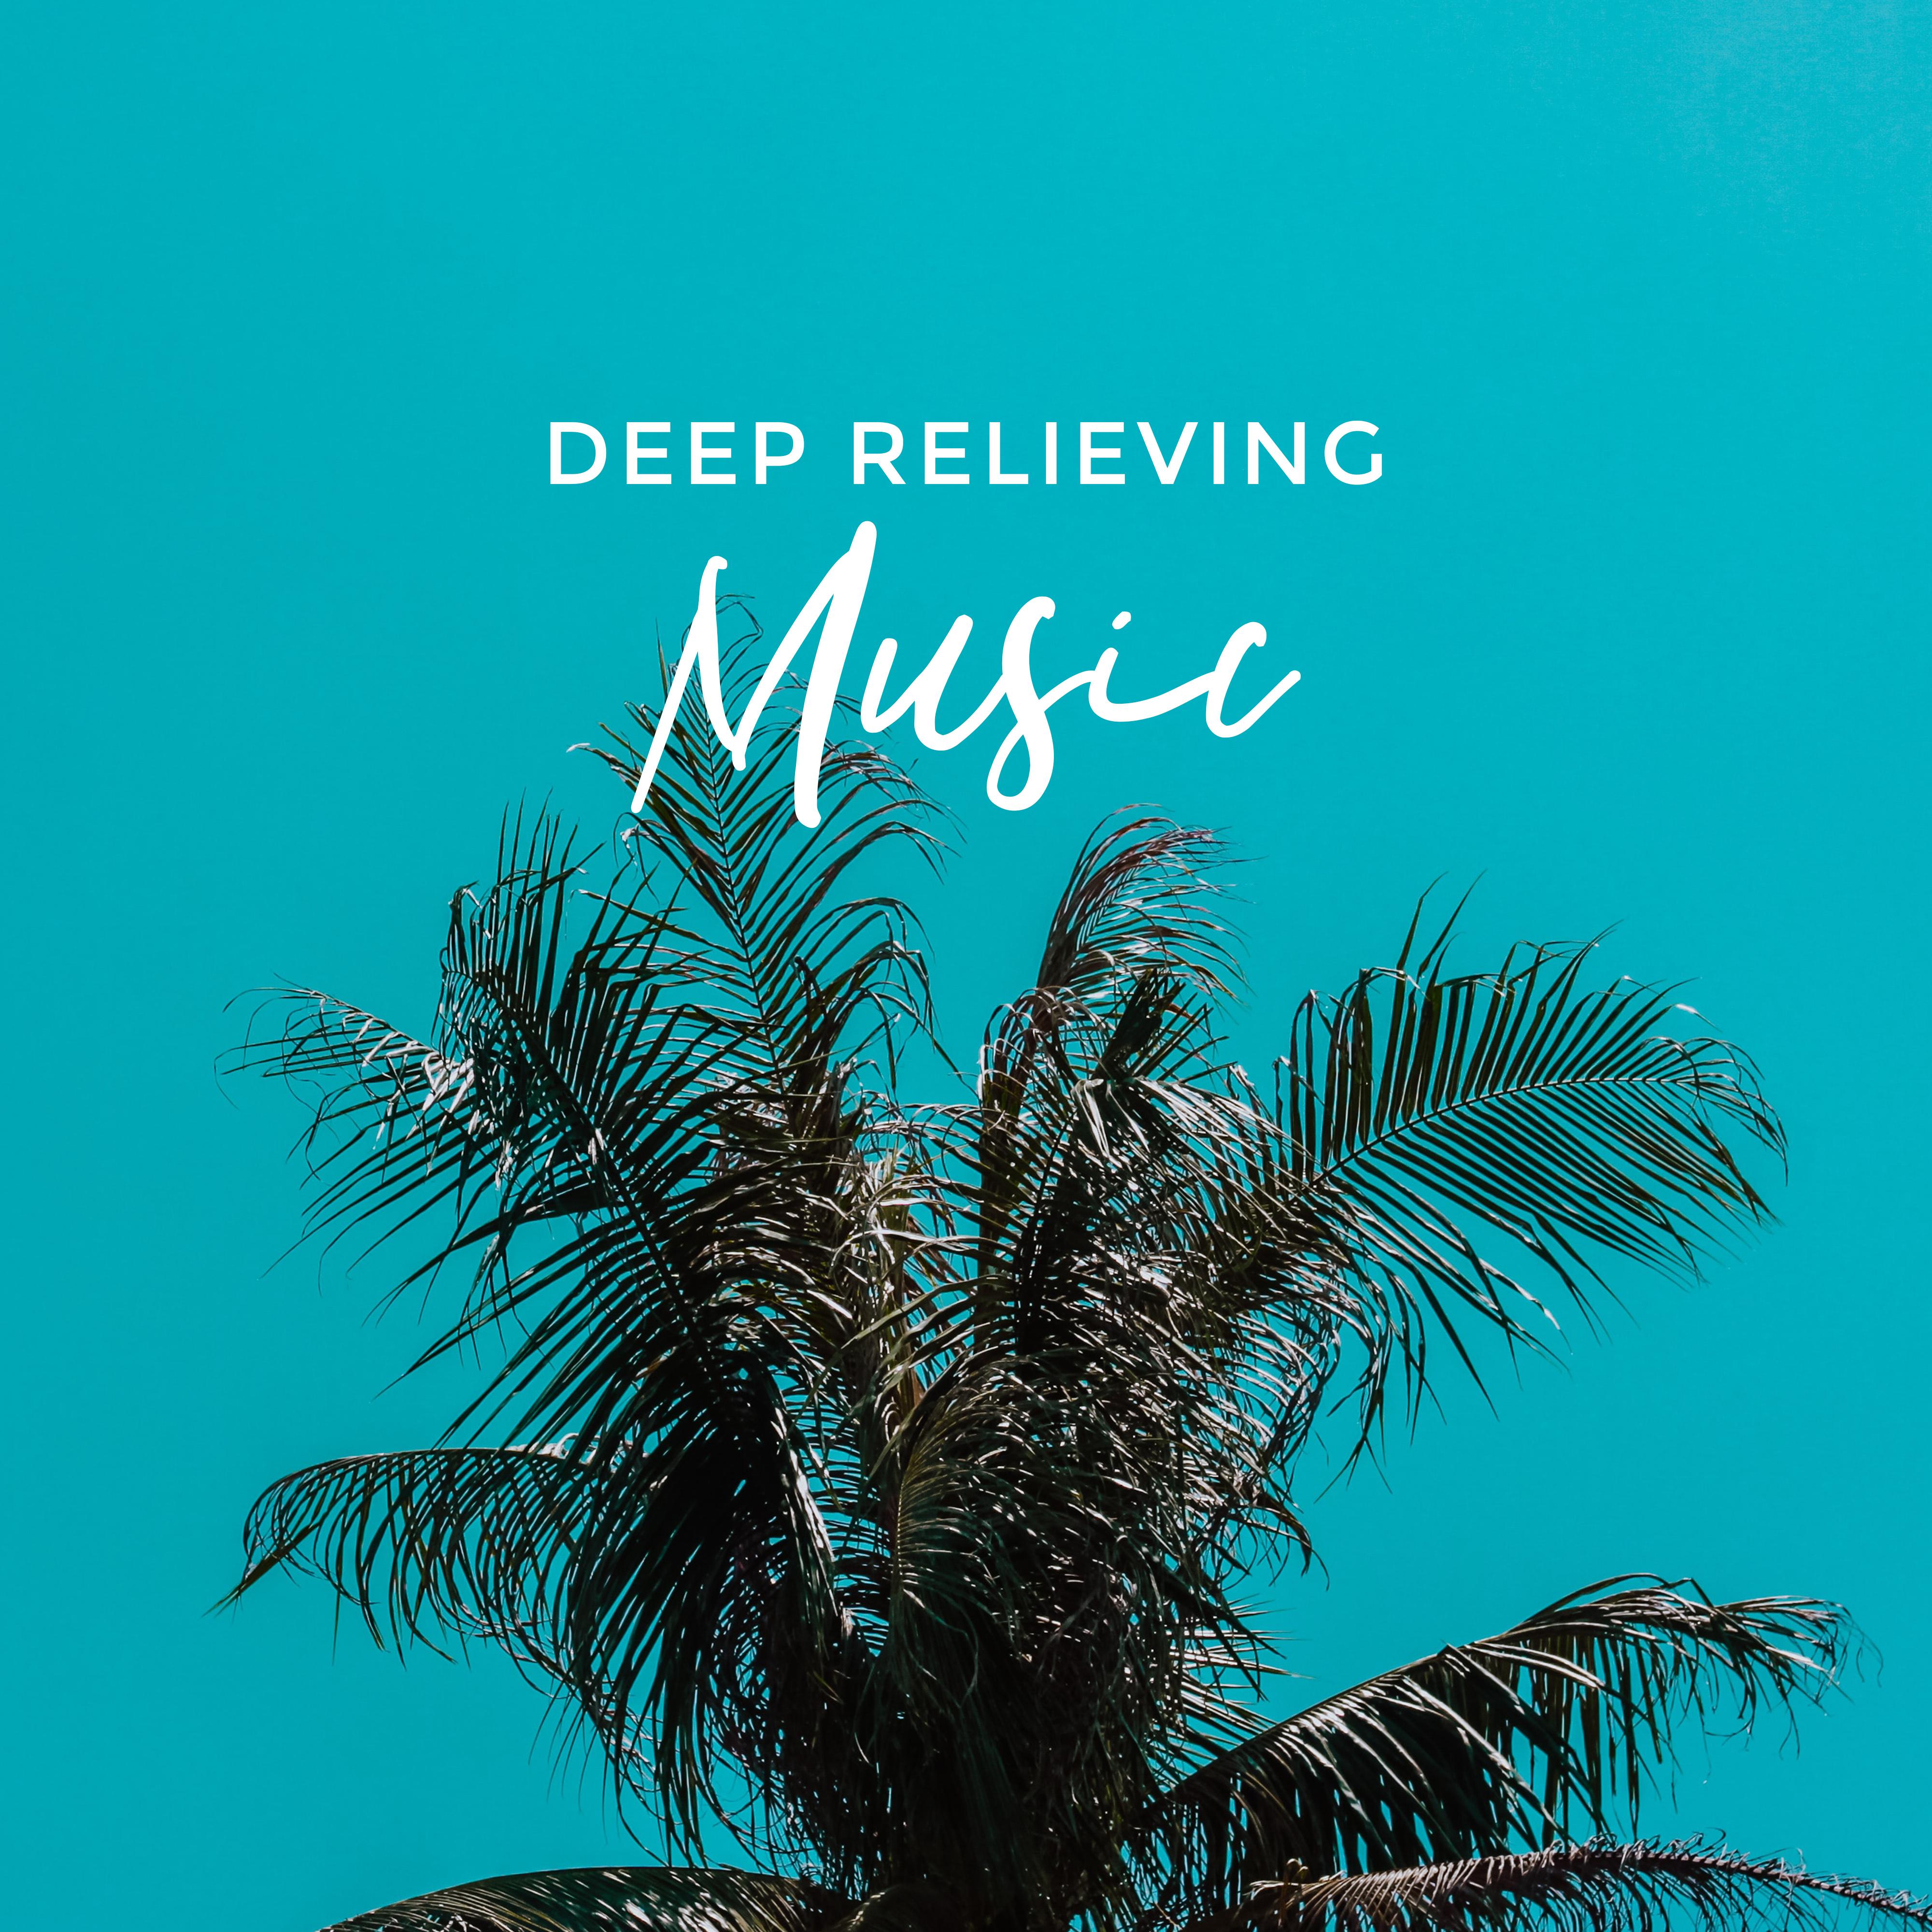 Deep Relieving Music - Relaxation Music to Relieve Stress, Relieve Pain, Relieve Anxiety and Many Other Ailments